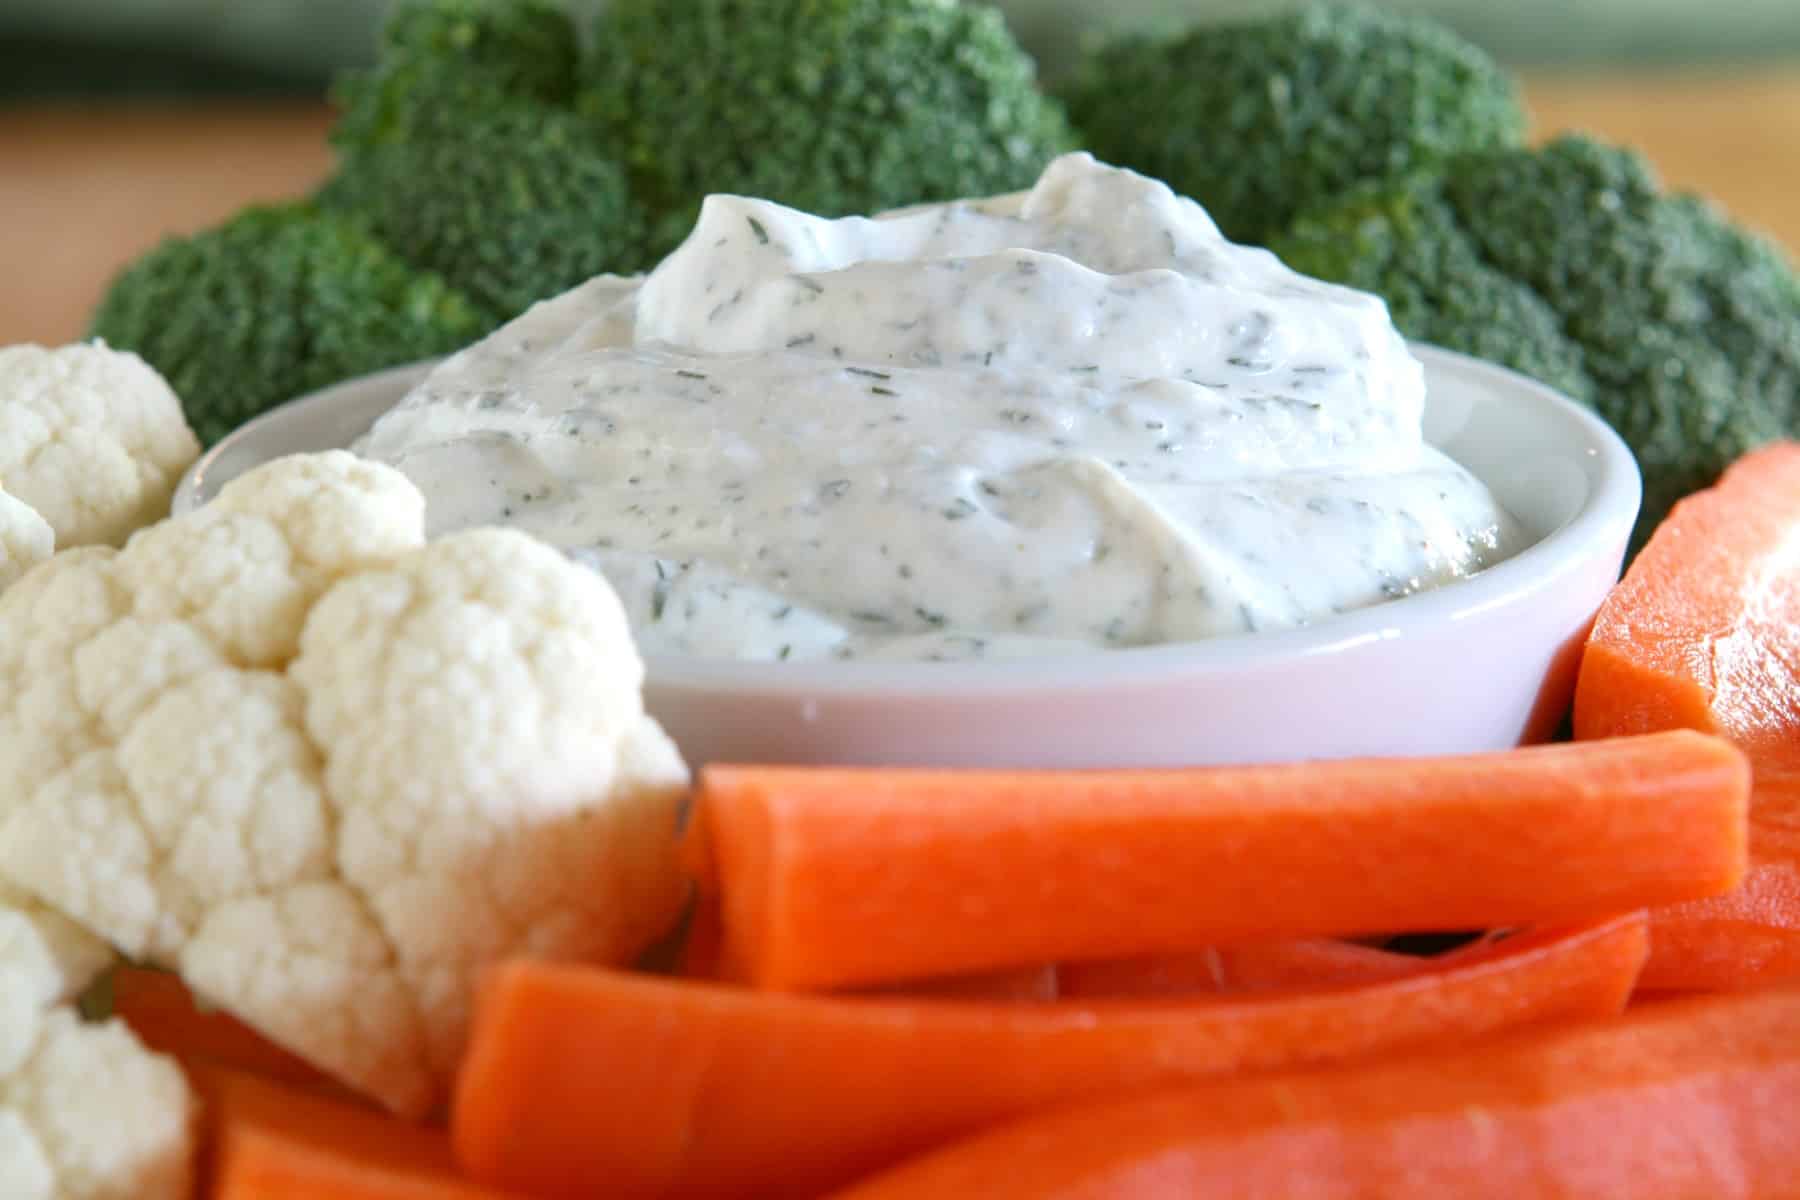 ranch dip and dressing spice mix in a bowl with veggies